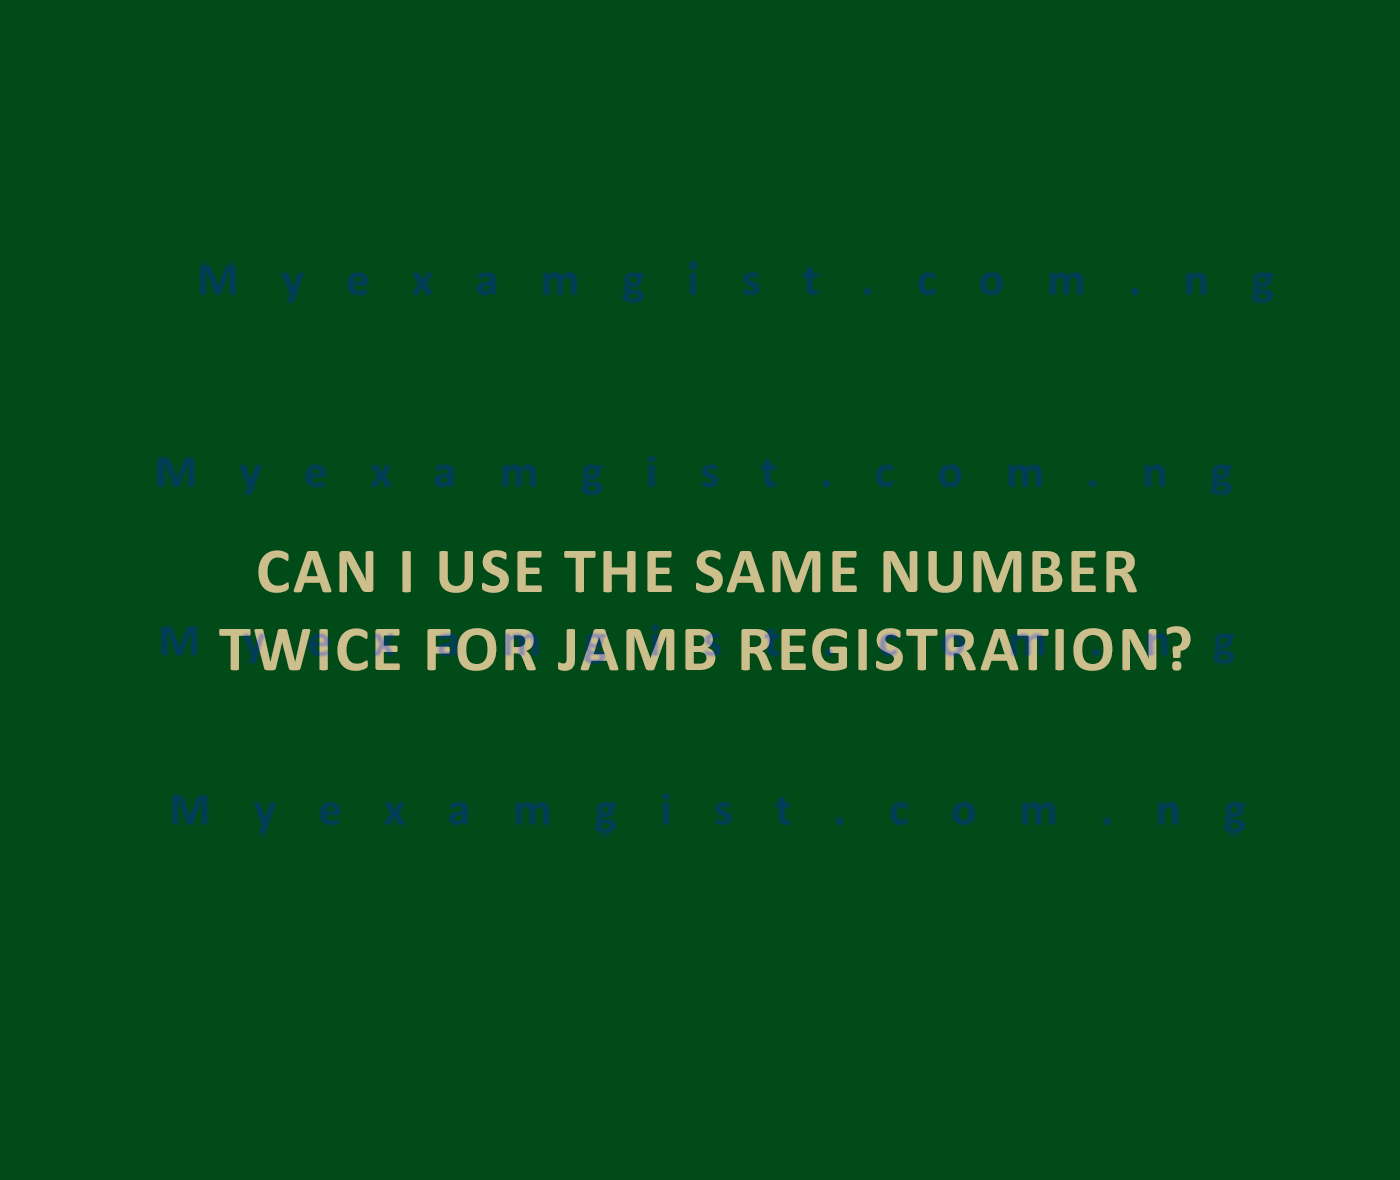 Can I use the same number twice for JAMB registration?